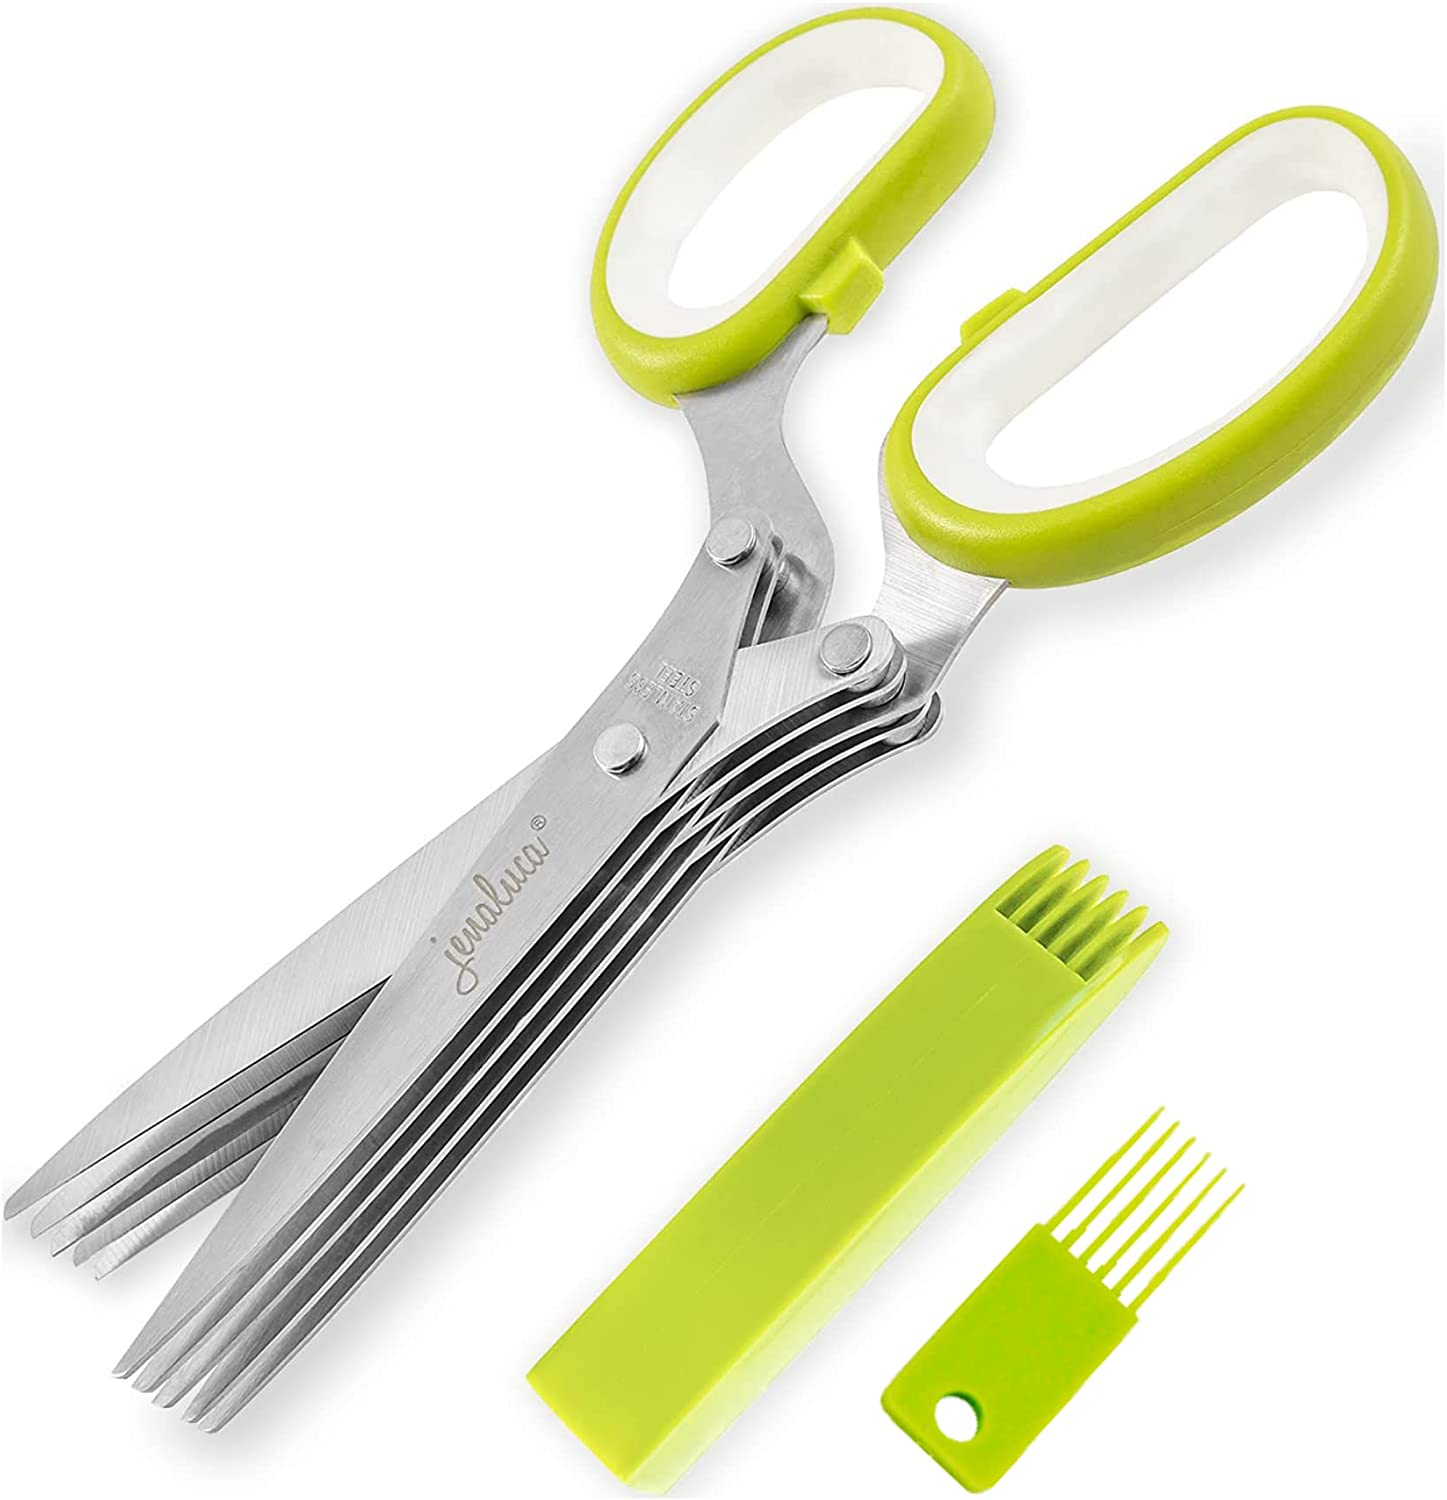 herb scissors | Affordable Kitchen Tools